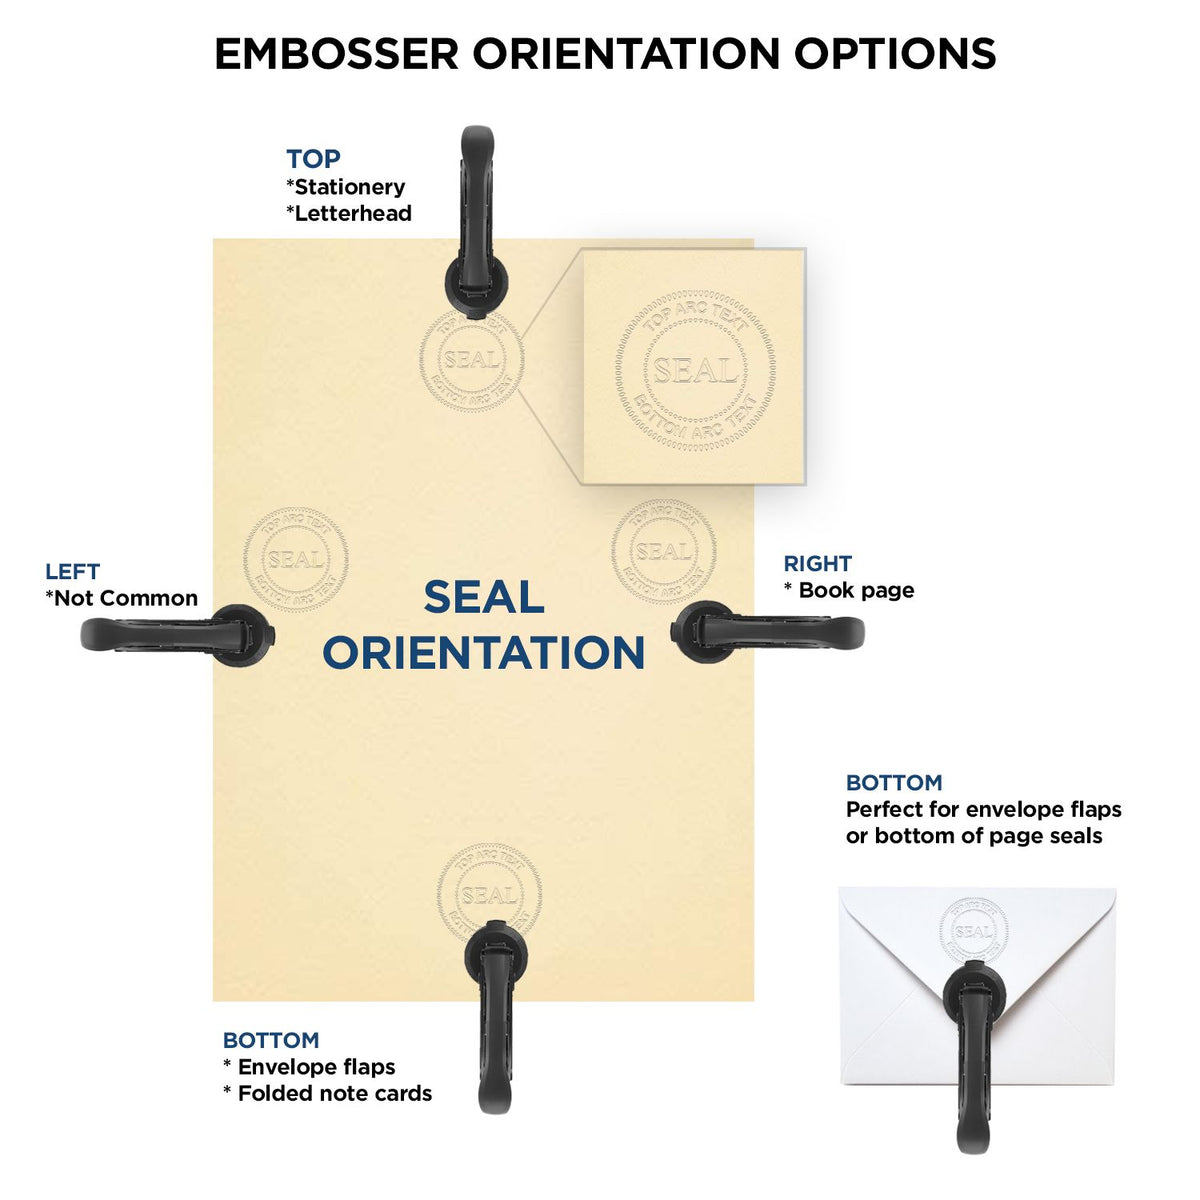 An infographic for the Handheld Kentucky Professional Geologist Embosser showing embosser orientation, this is showing examples of a top, bottom, right and left insert.